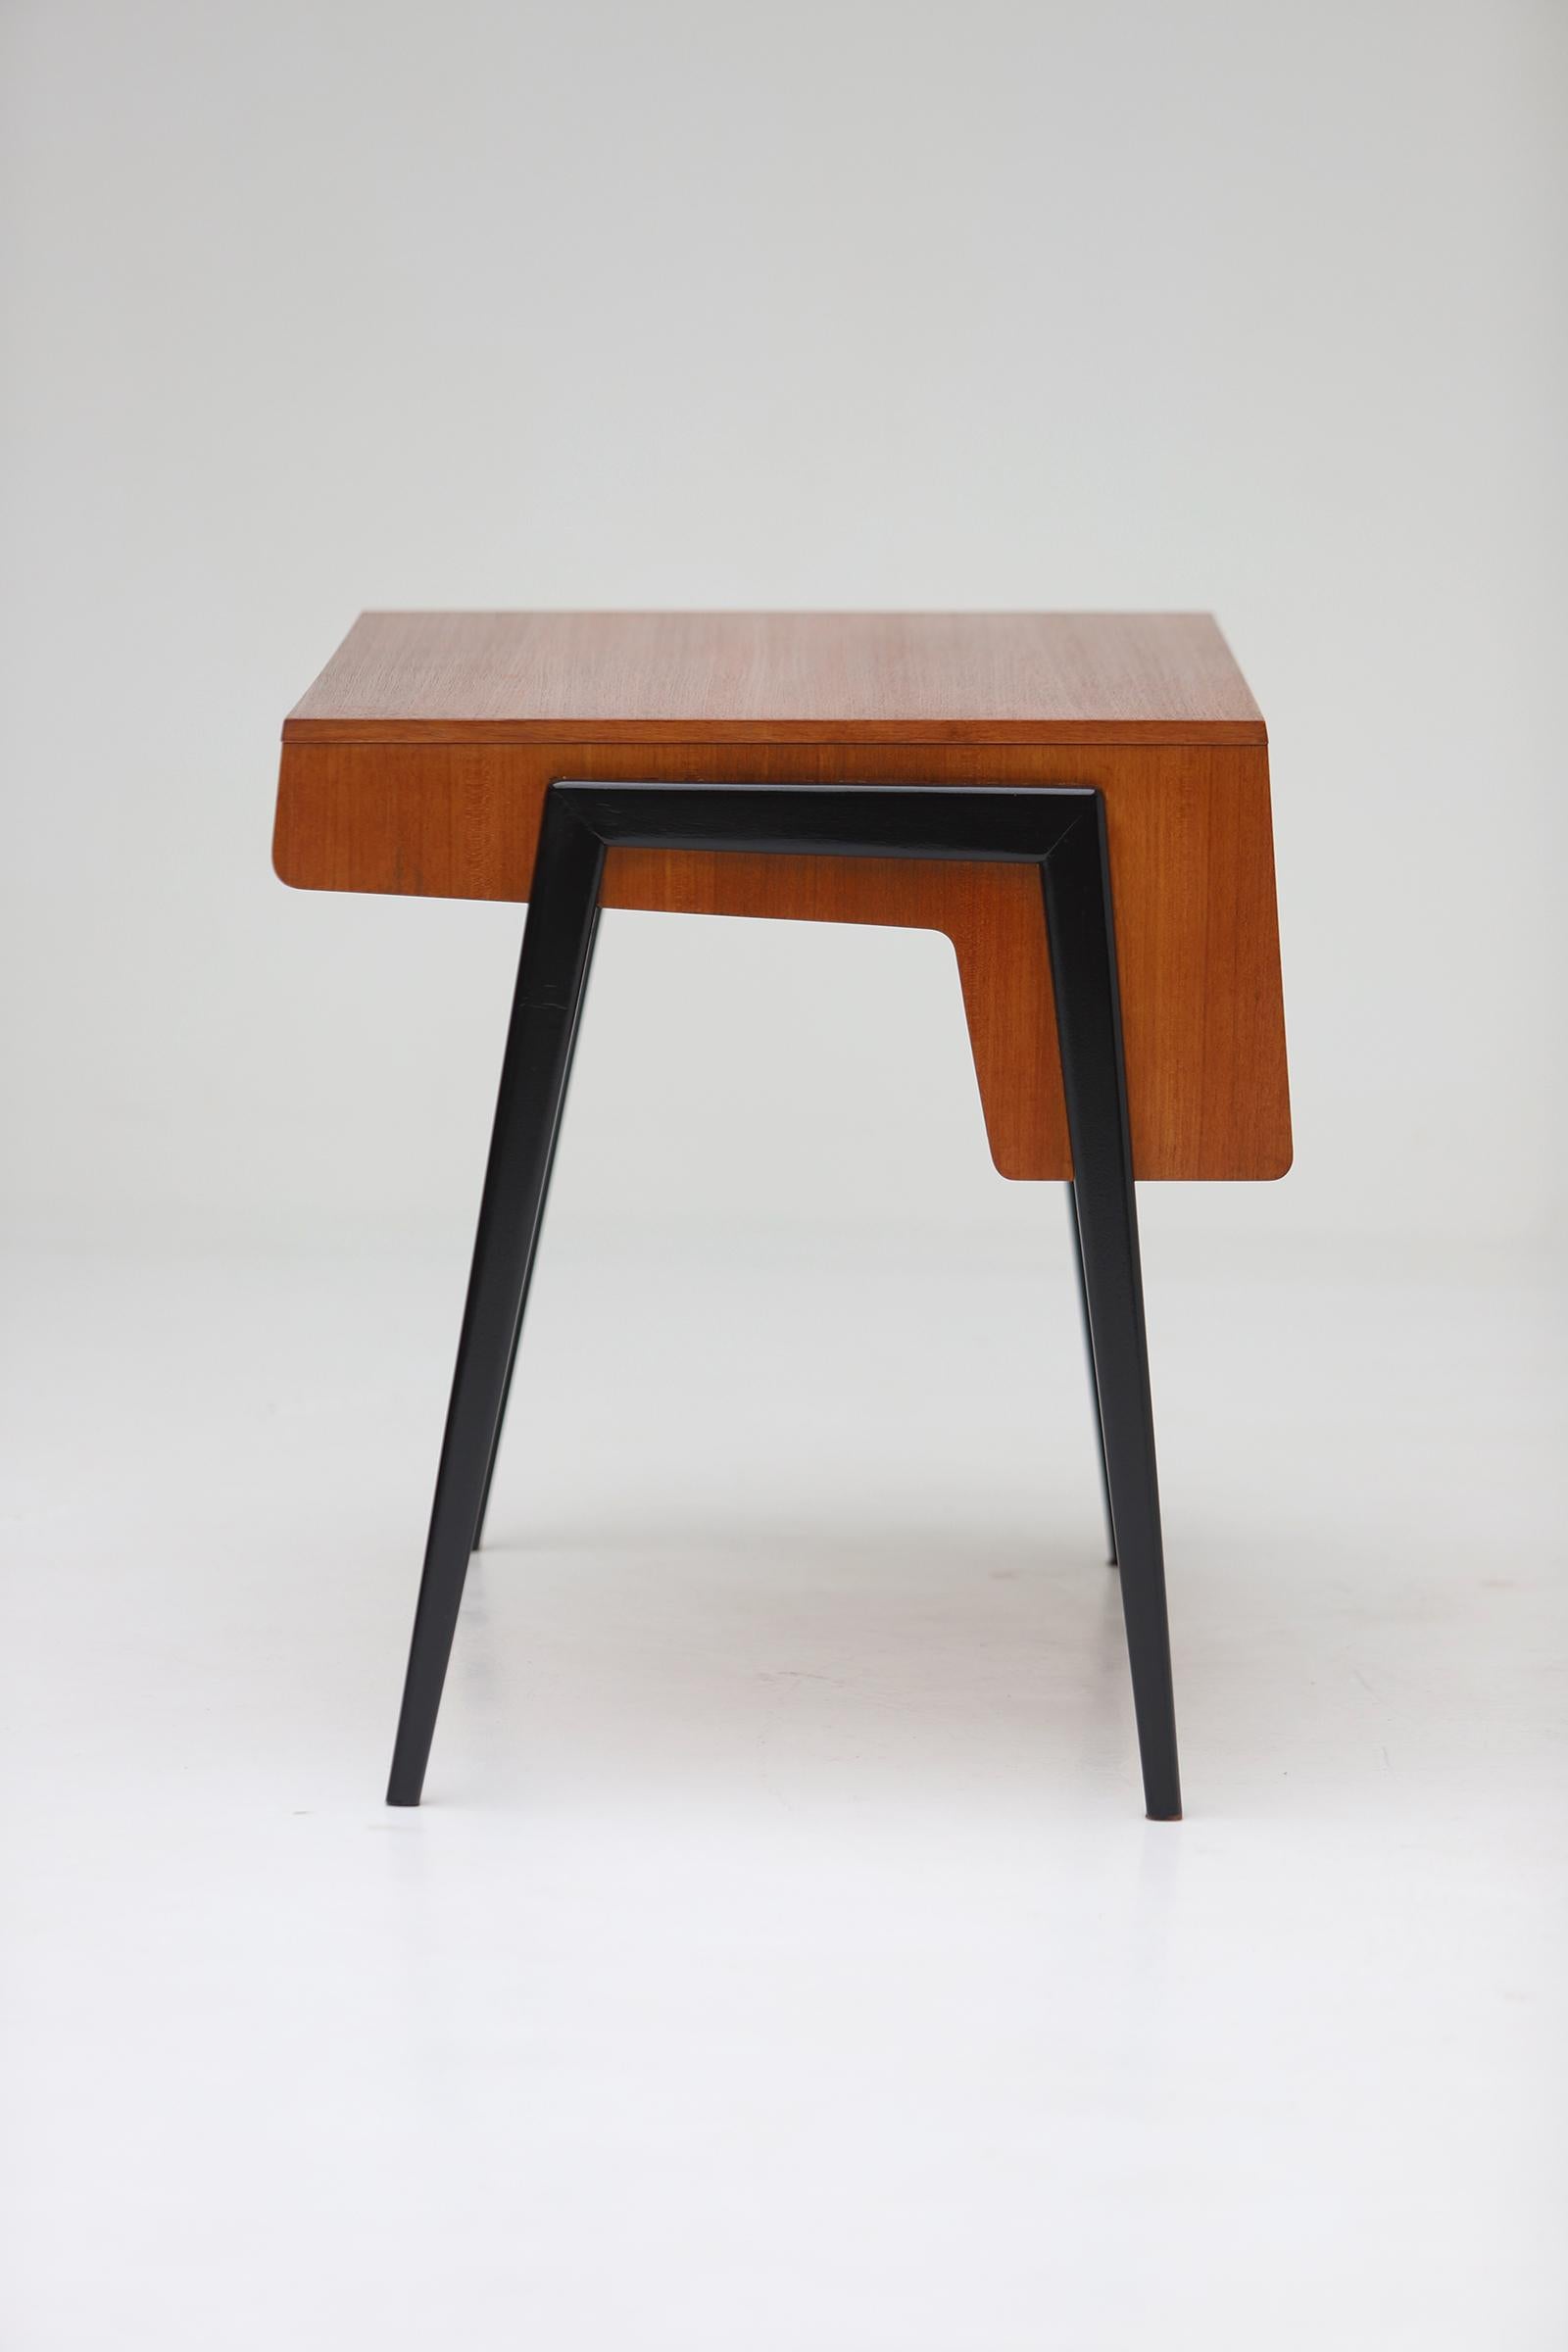 Wood Mid-Century Modern Writing Desk Manufactured by Everest in the 1950s